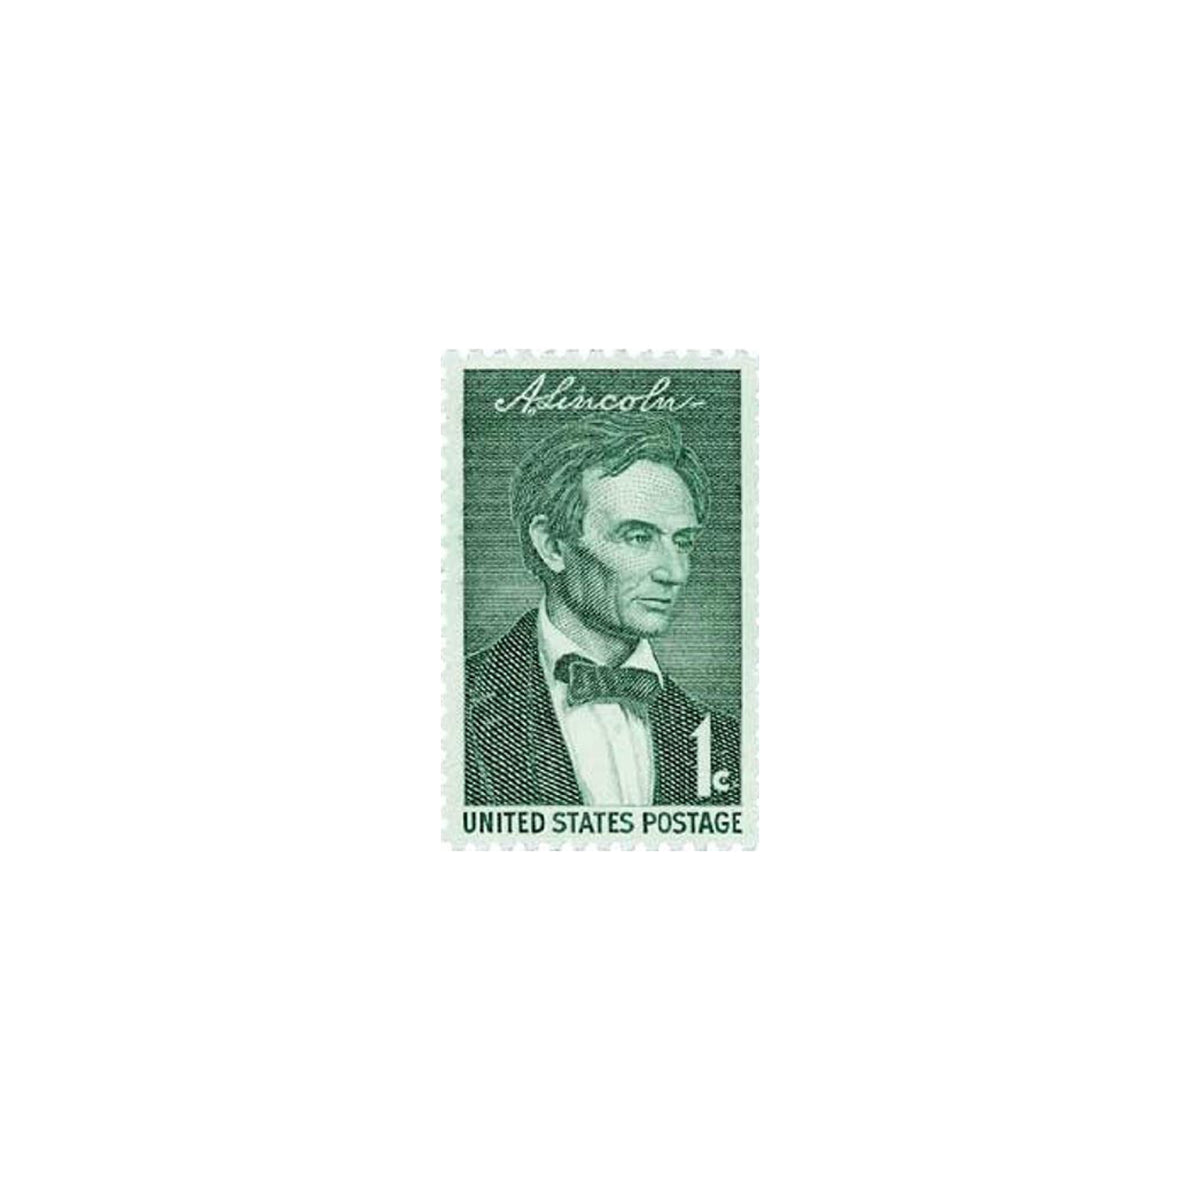 10 Lincoln Quote Postage Stamps Unused Vintage Postage for Mailing